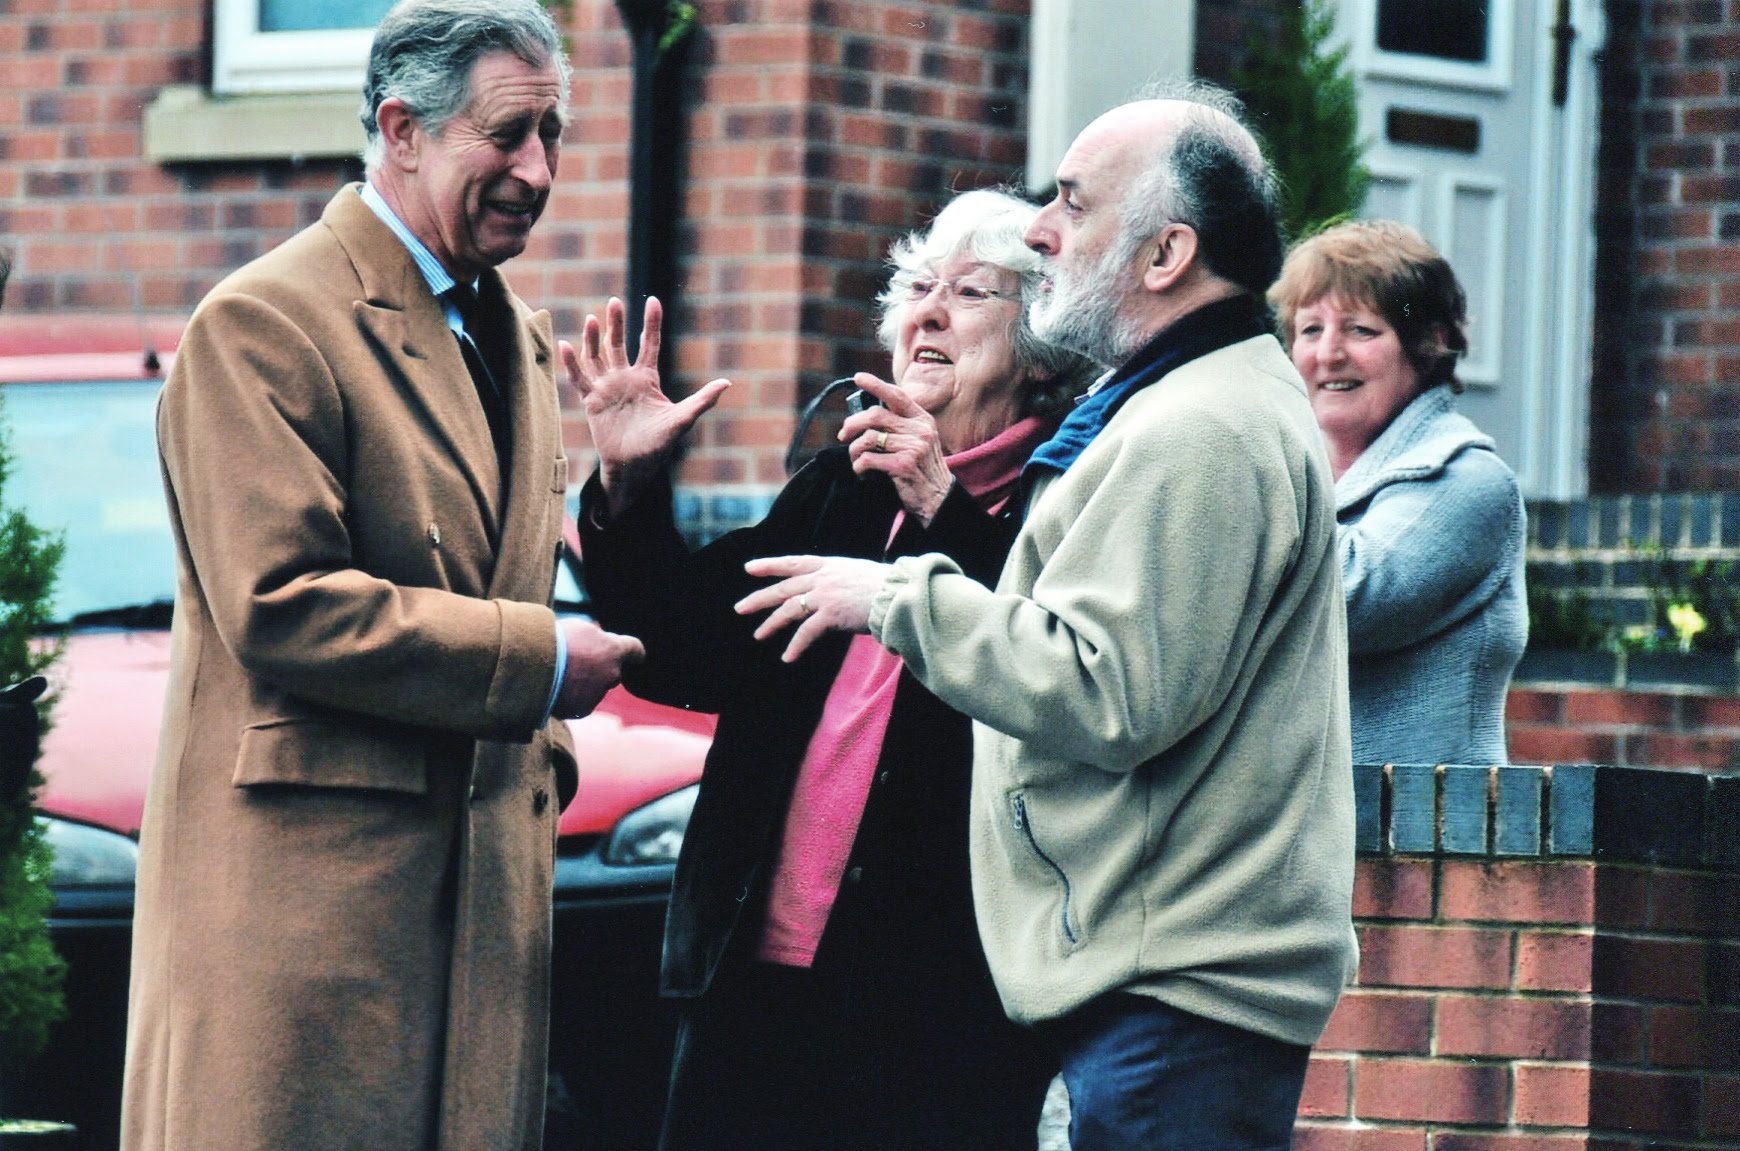  This picture is of my mother and stepfather, Pauline and David Roberts, explaining to the Prince of Wales why their village of Froncysyllte is a great place to live. My mother's excitement and Prince Charles amusement is written all over their faces